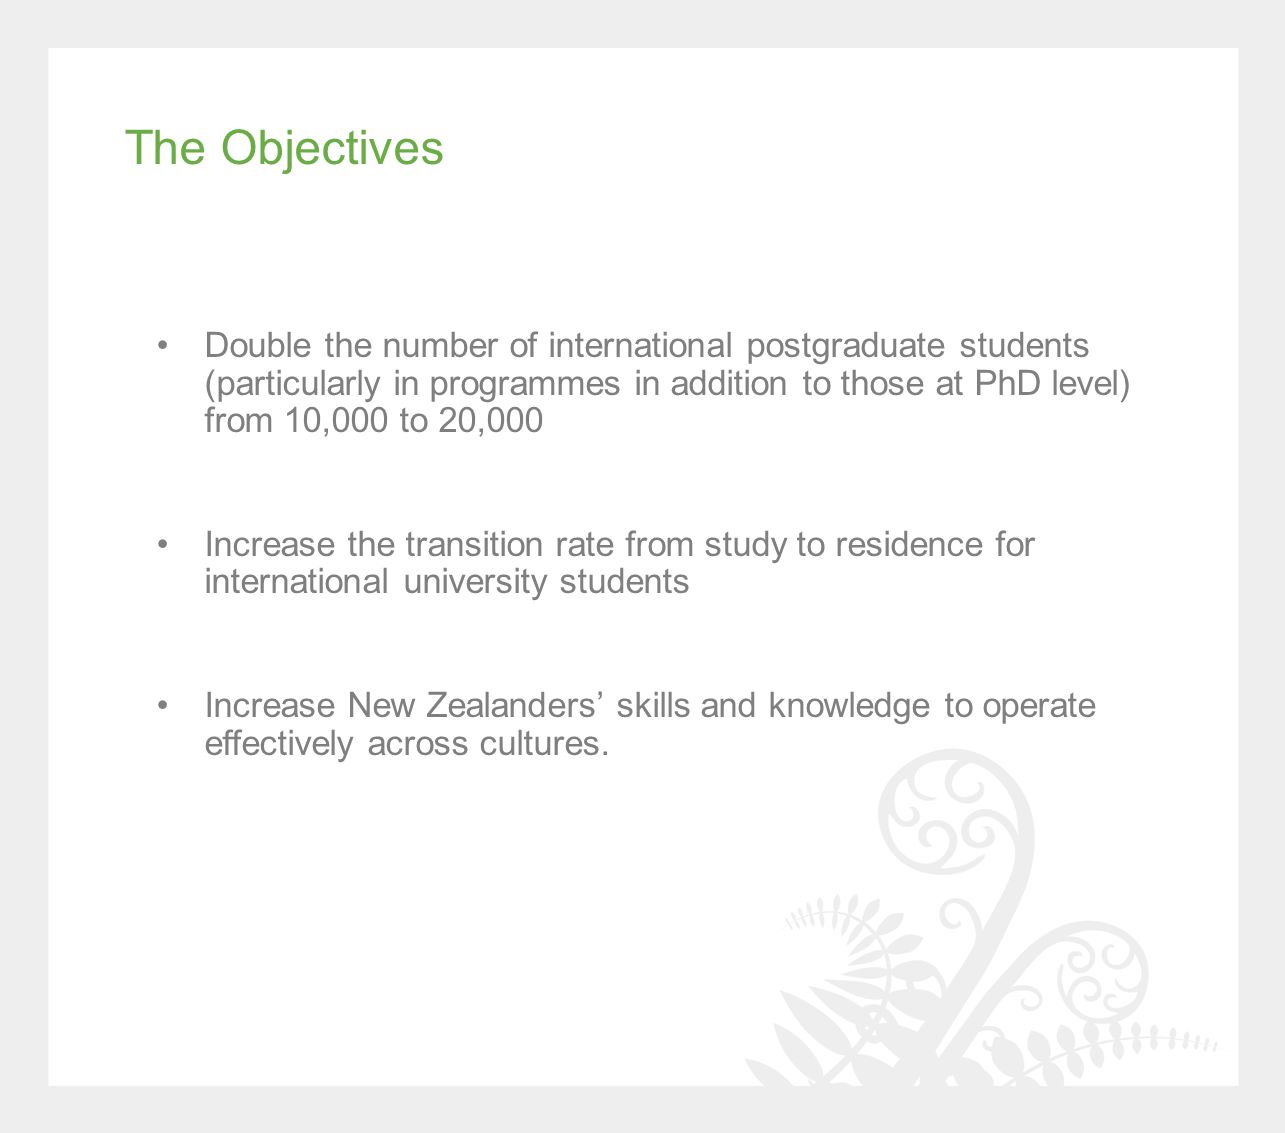 Double the number of international postgraduate students (particularly in programmes in addition to those at PhD level) from 10,000 to 20,000 Increase the transition rate from study to residence for international university students Increase New Zealanders’ skills and knowledge to operate effectively across cultures.